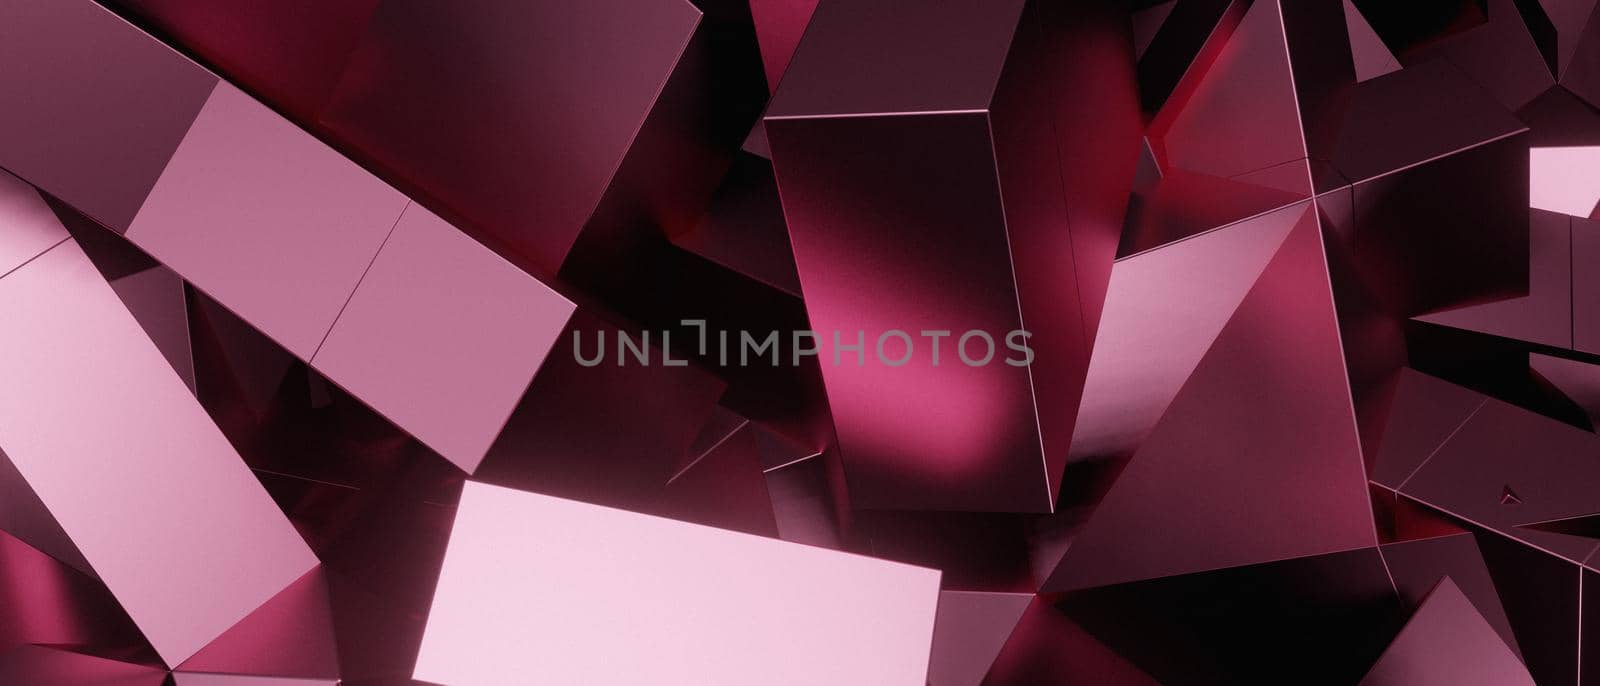 Abstract Luxurious 3D Chaos Trendy Futuristic Pastel Pink Iillustration Background Wallpaper 3D Illustration